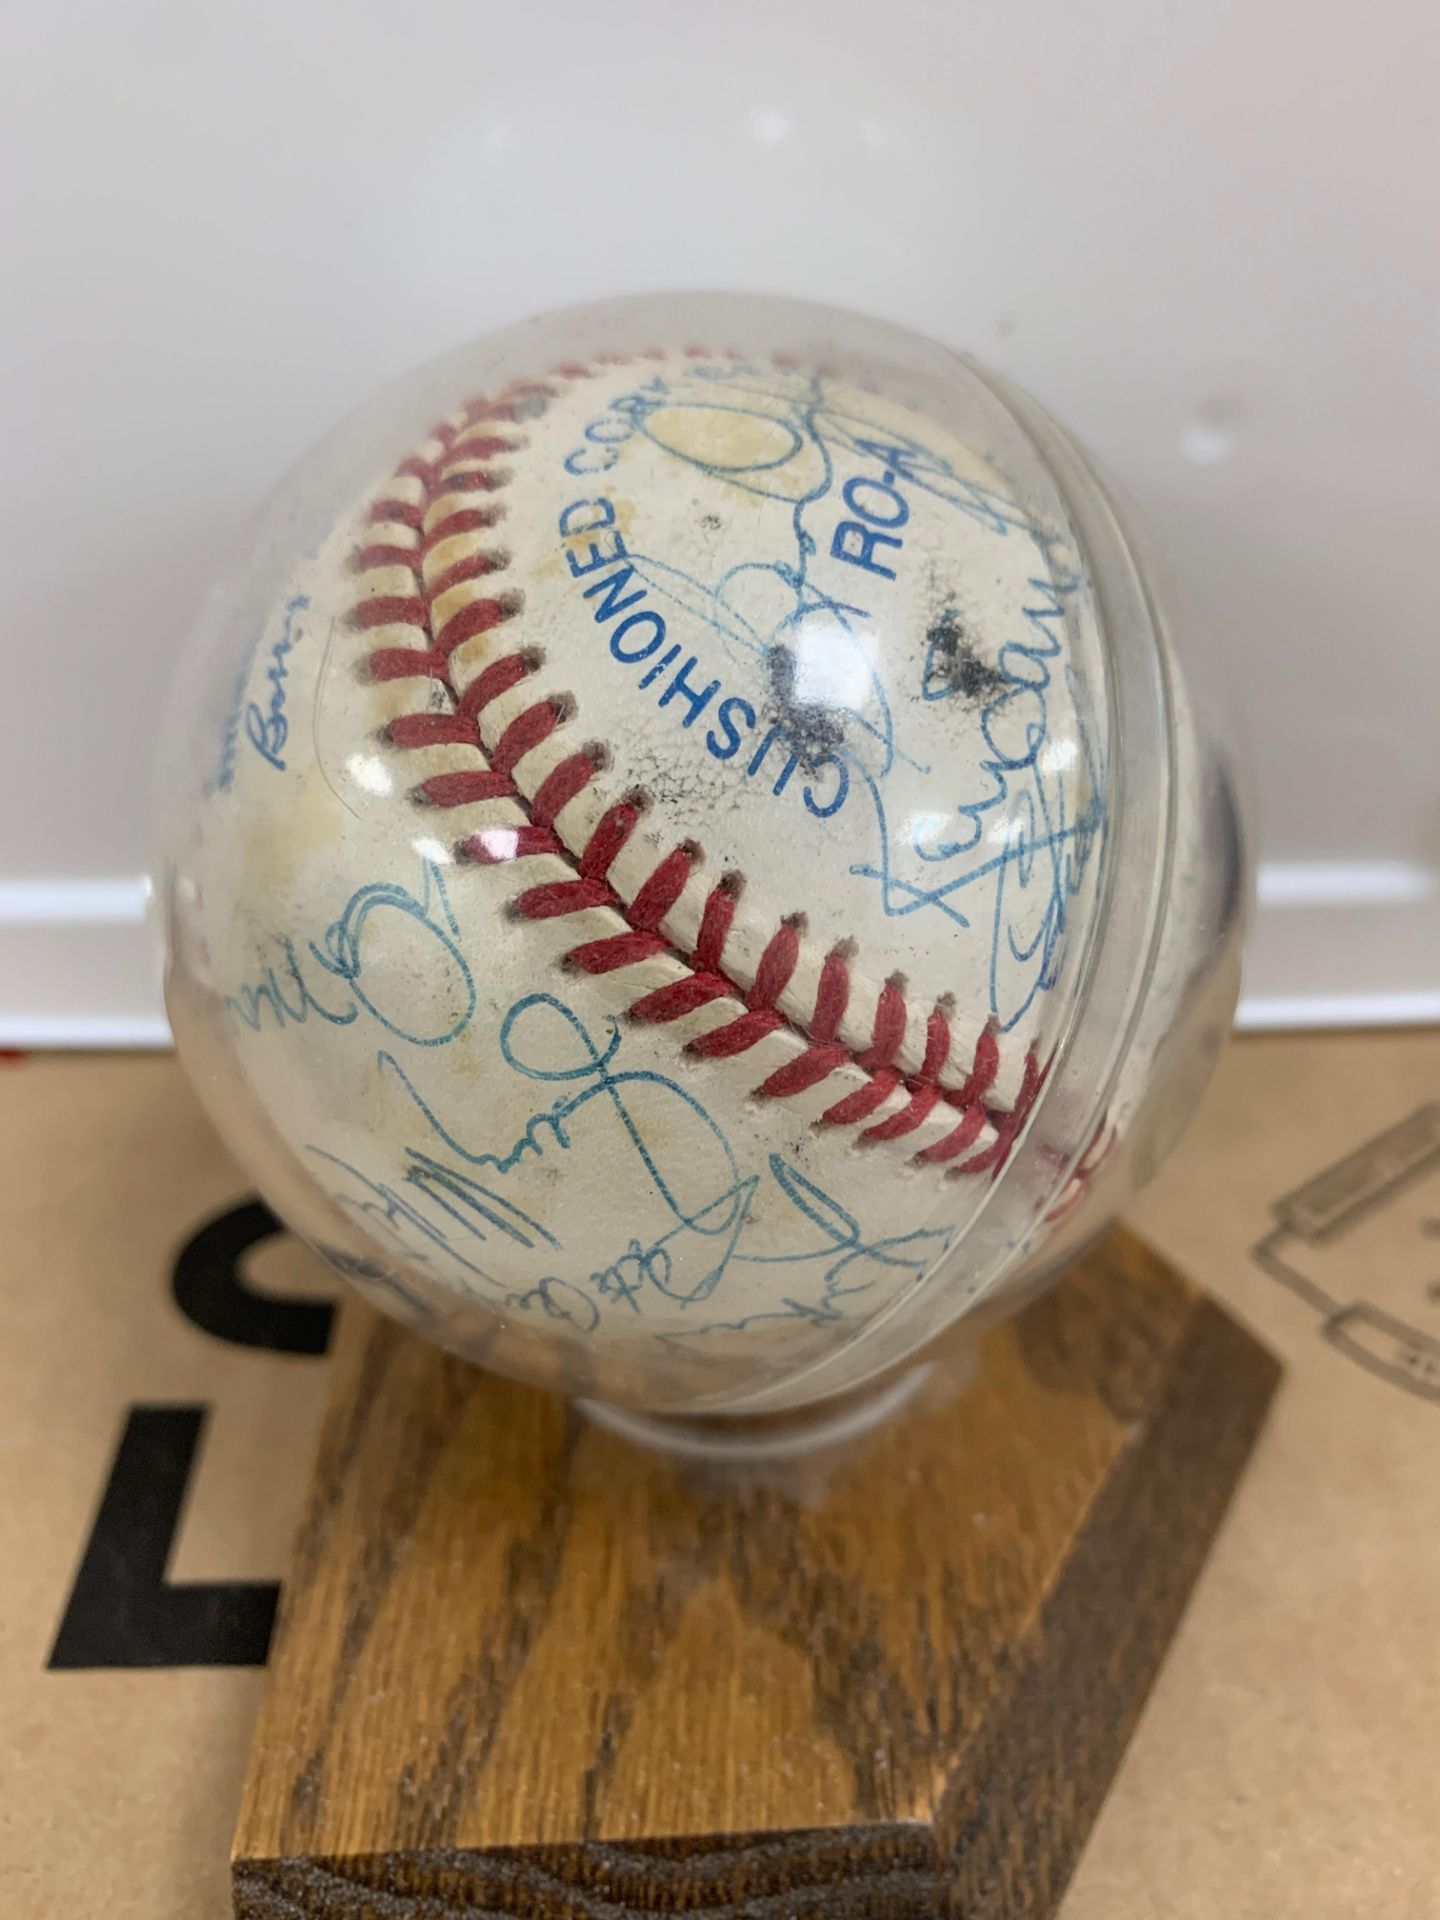 Signed Baseball by Milwaukee Braves Baseball Team, in Case and Stand - Image 2 of 5